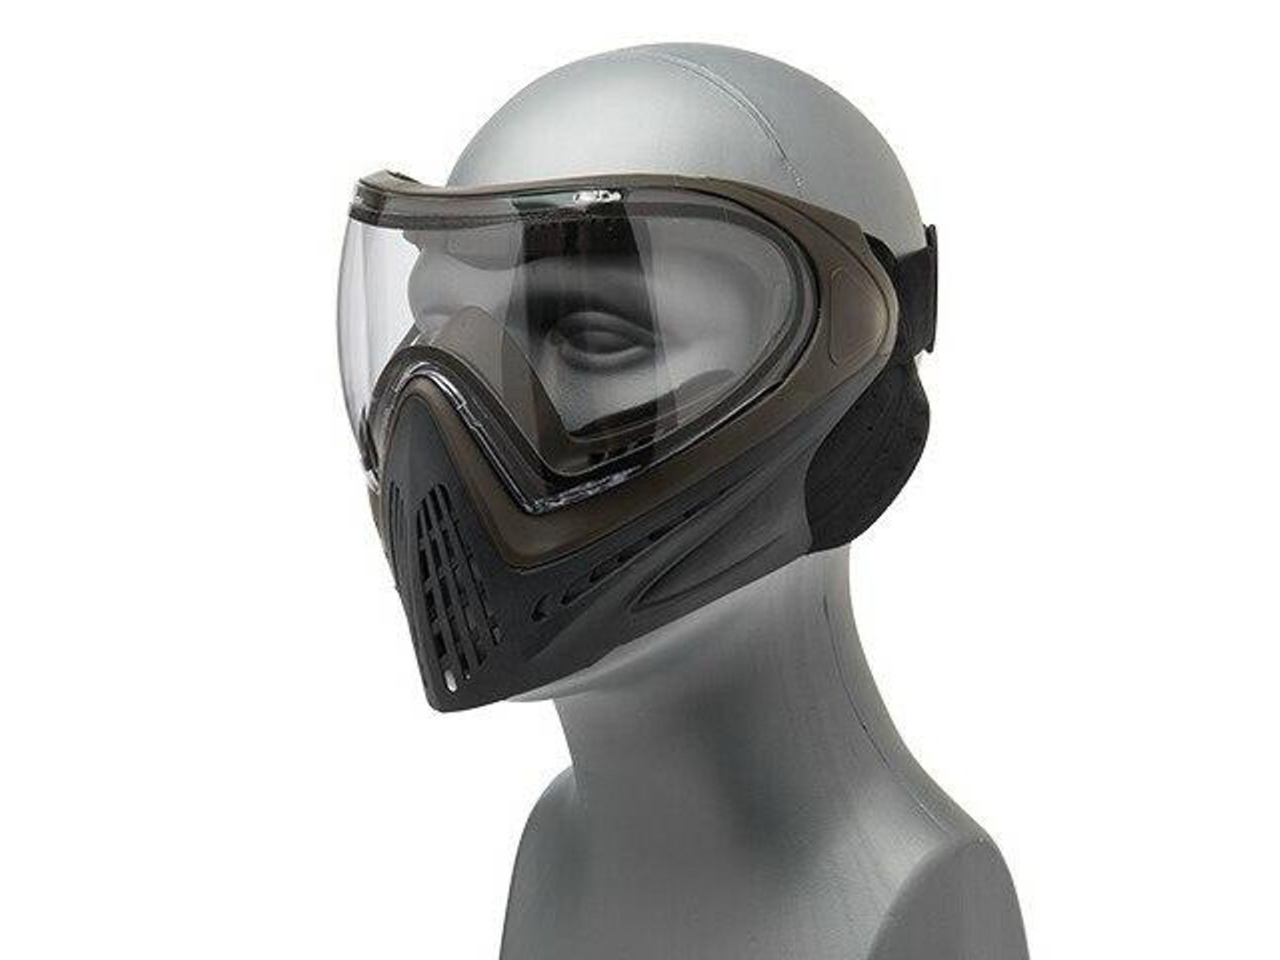 UK Arms G-Force Modern Full Face Mask, Gray / Brown